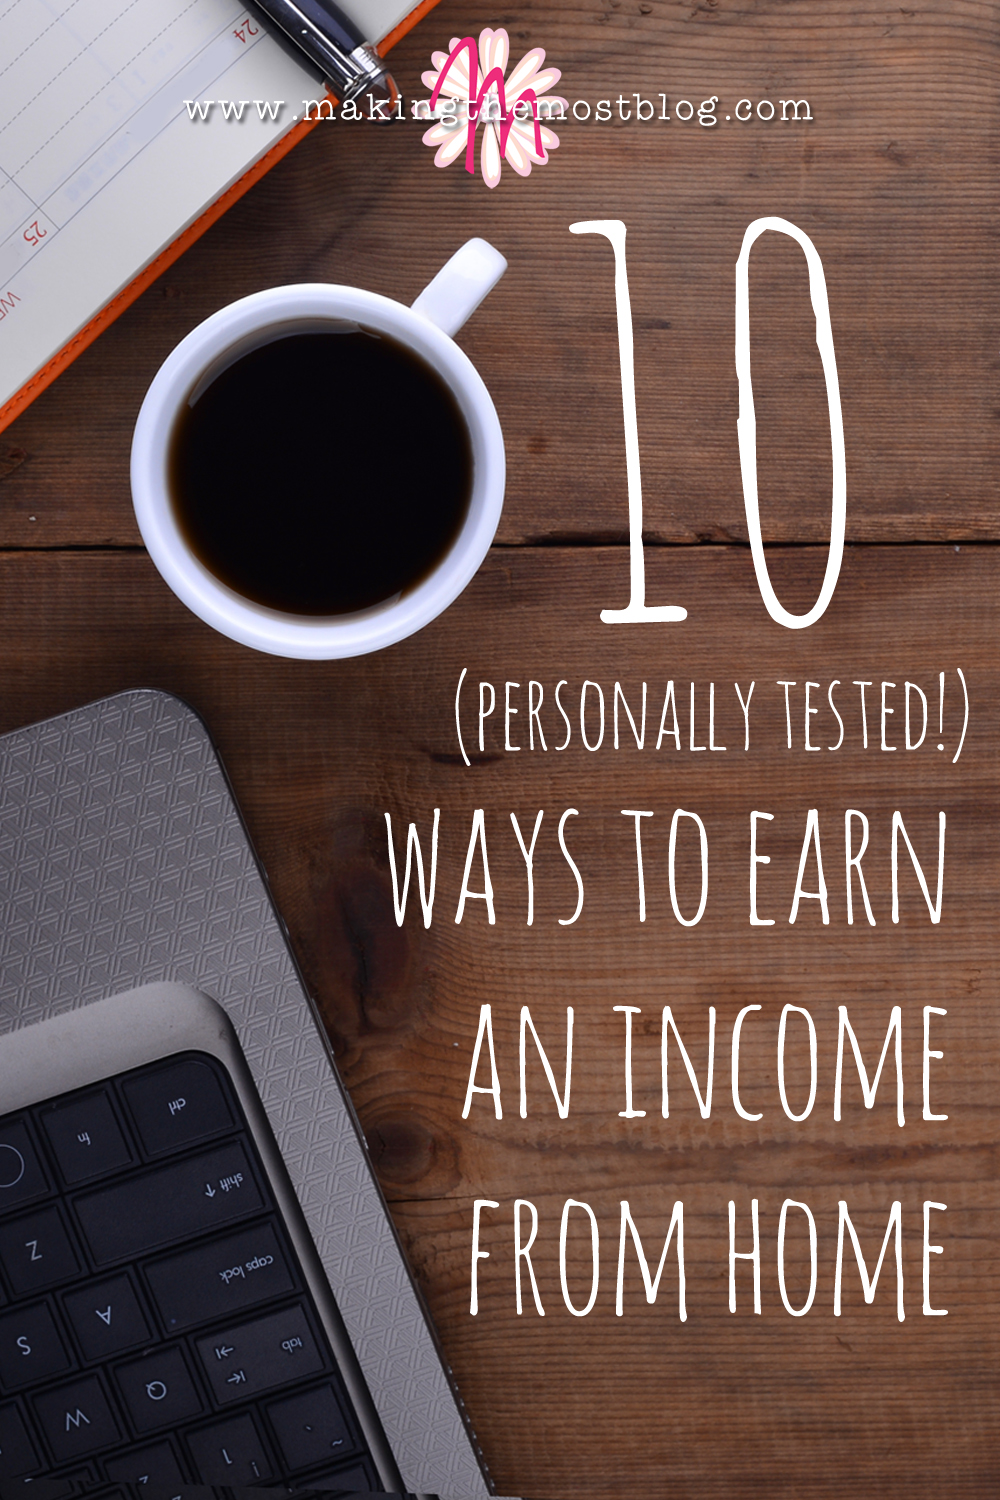 10 (Personally Tested!) Ways to Earn an Income from Home | Making the Most Blog